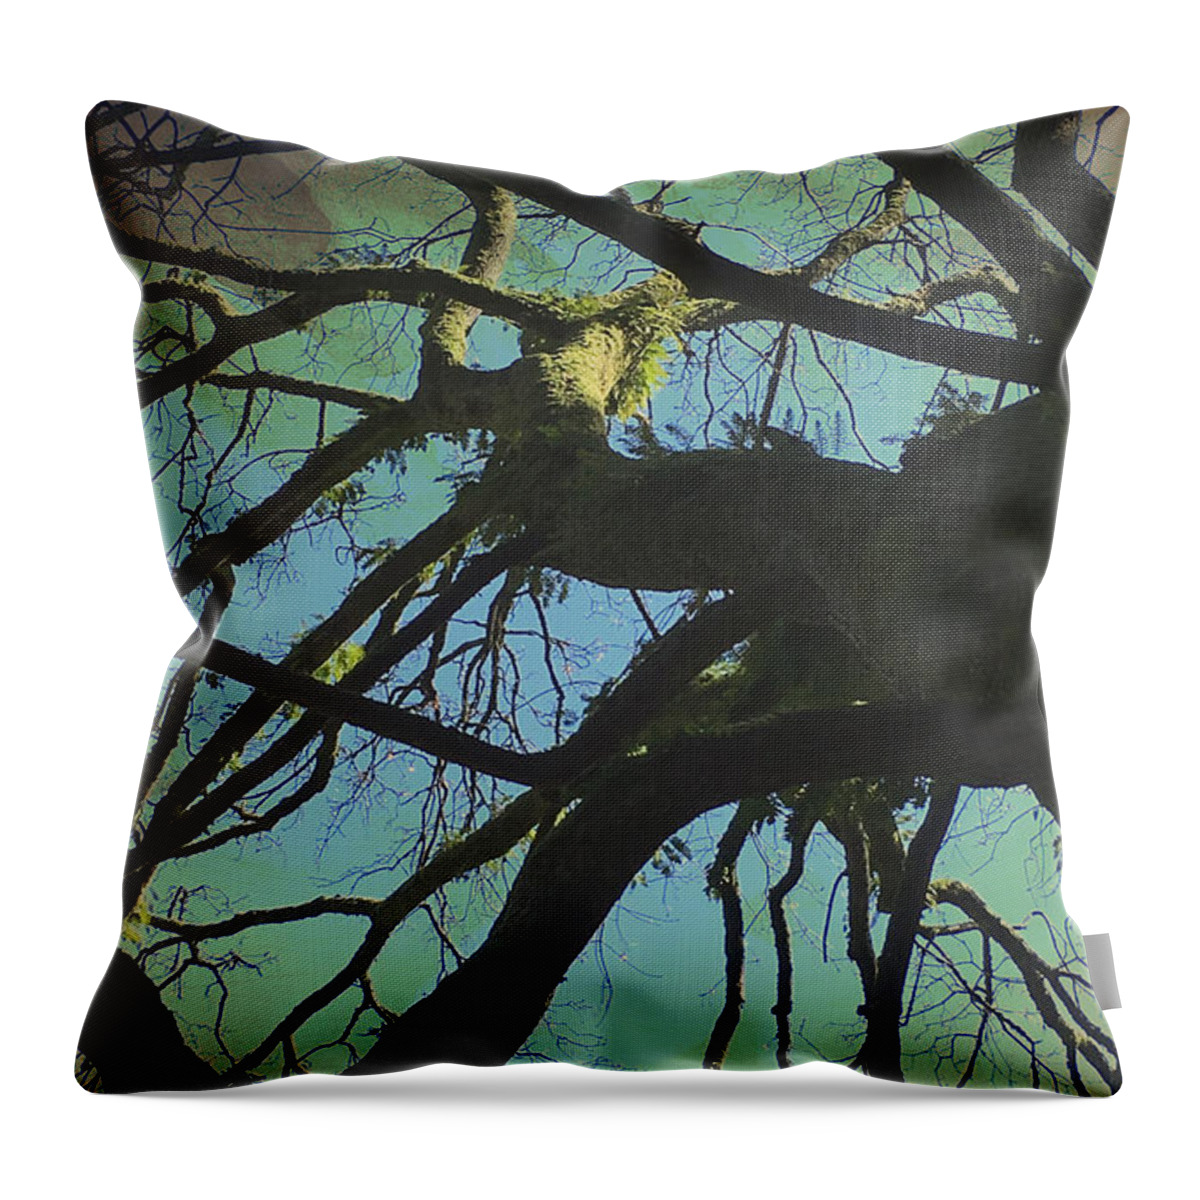 Connie Handscomb Throw Pillow featuring the photograph Dialogue by Connie Handscomb